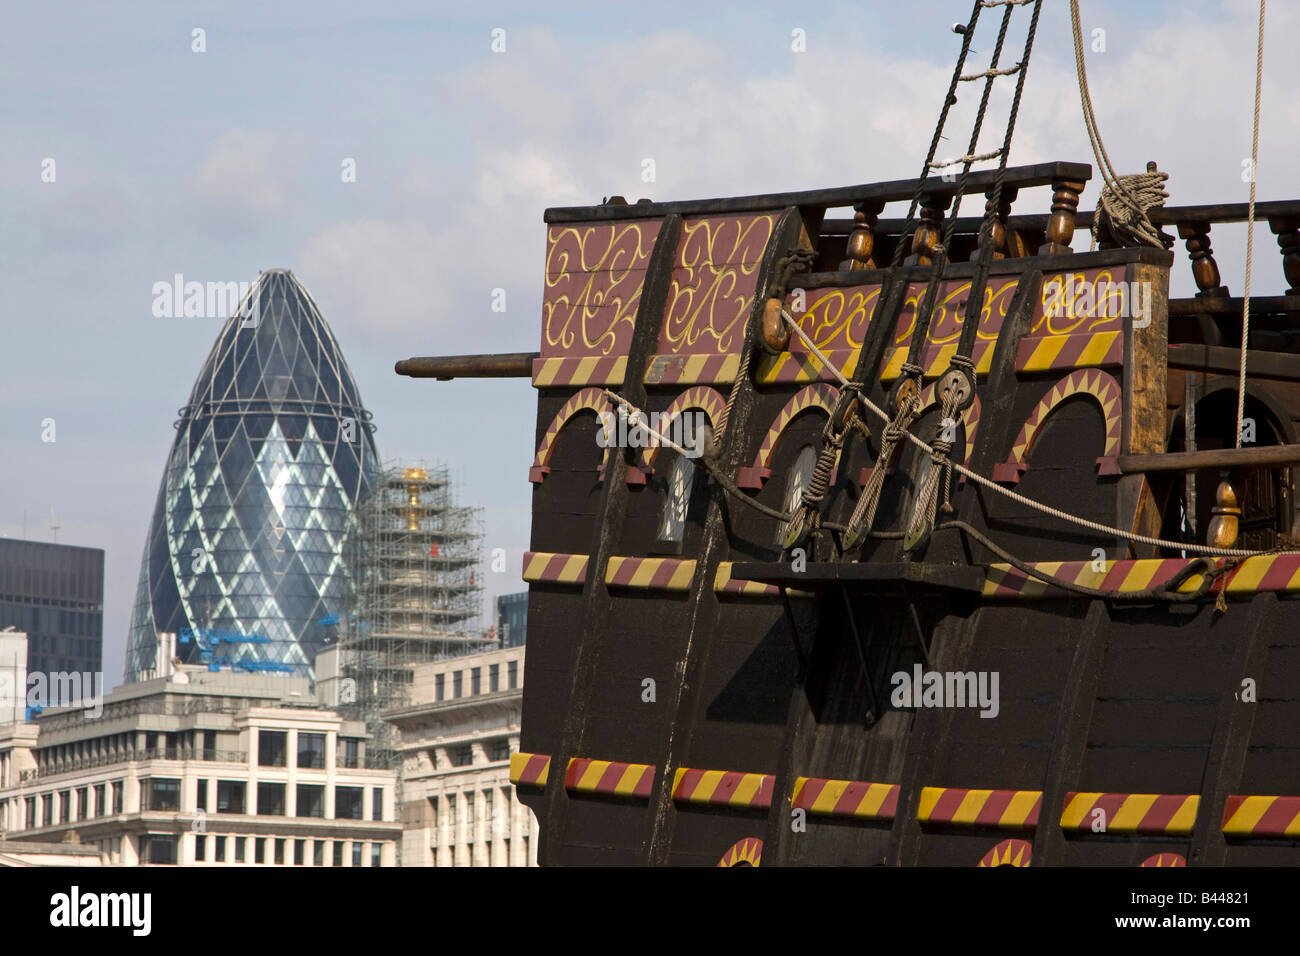 Replikat der Golden Hind angedockt in St Mary Overie Dock, London.england uk gb Stockfoto